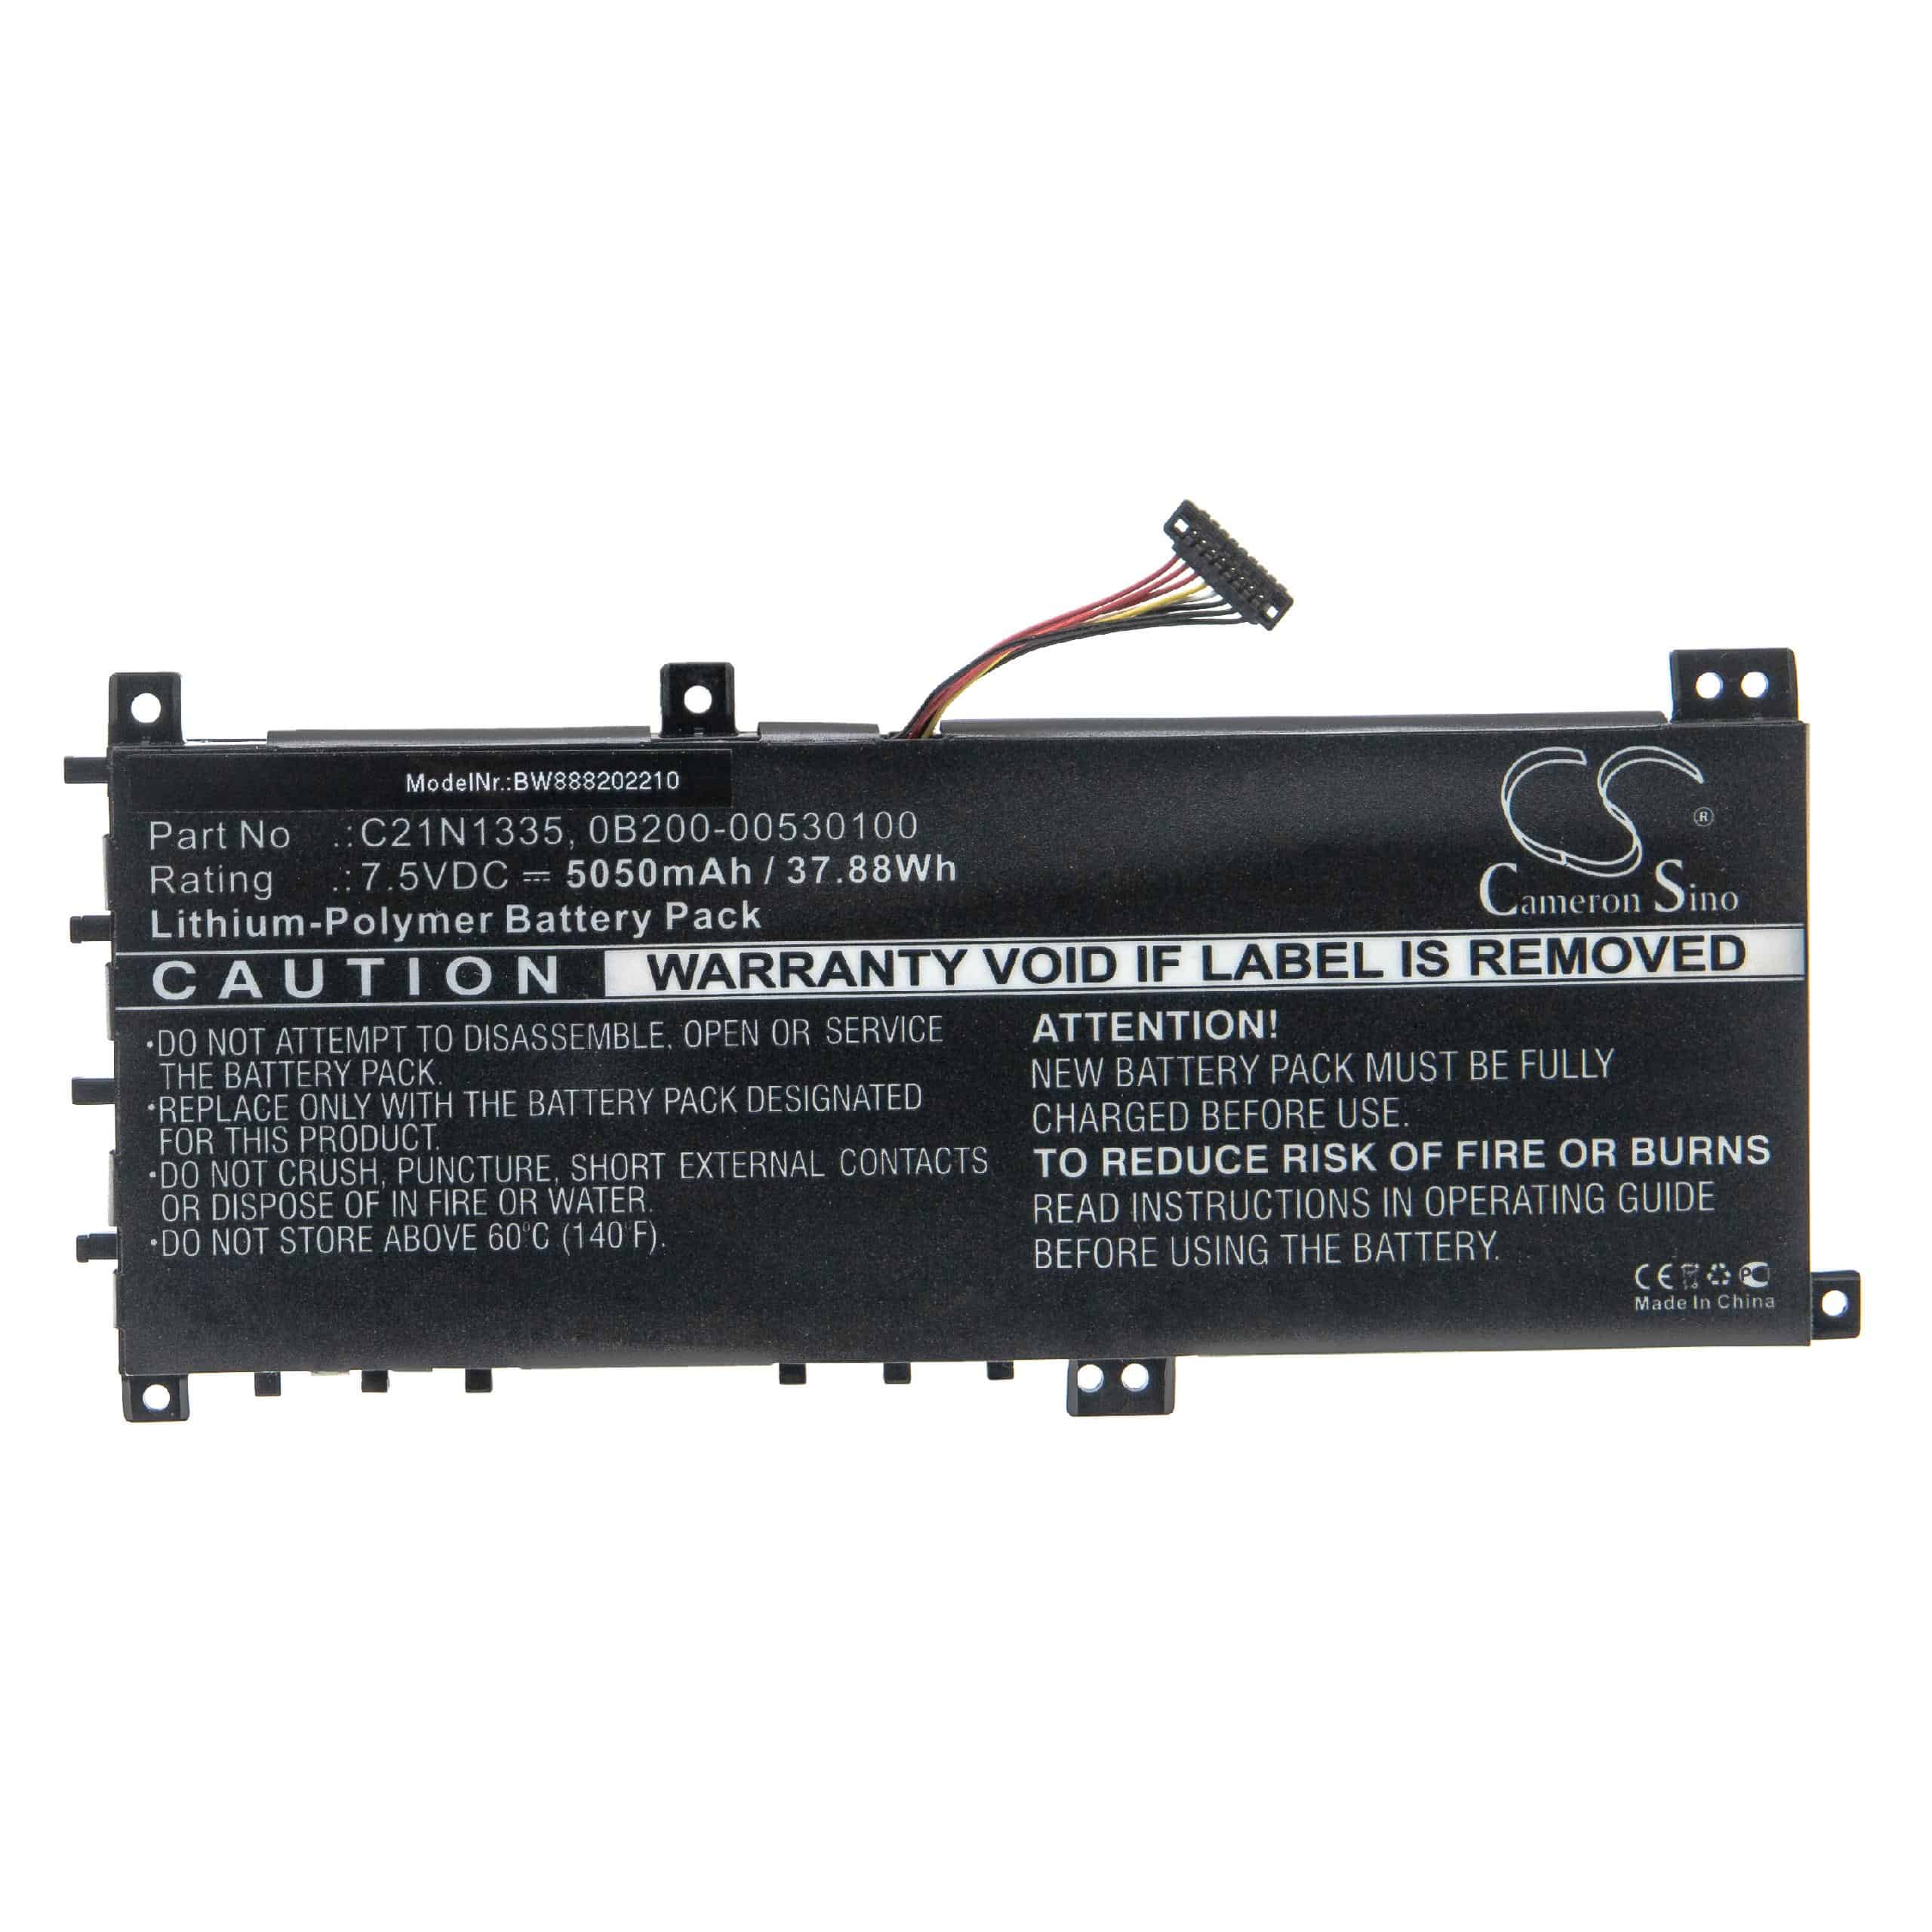 Notebook Battery Replacement for Asus 0B200-00530100, C21N1335 - 5050mAh 7.5V Li-polymer